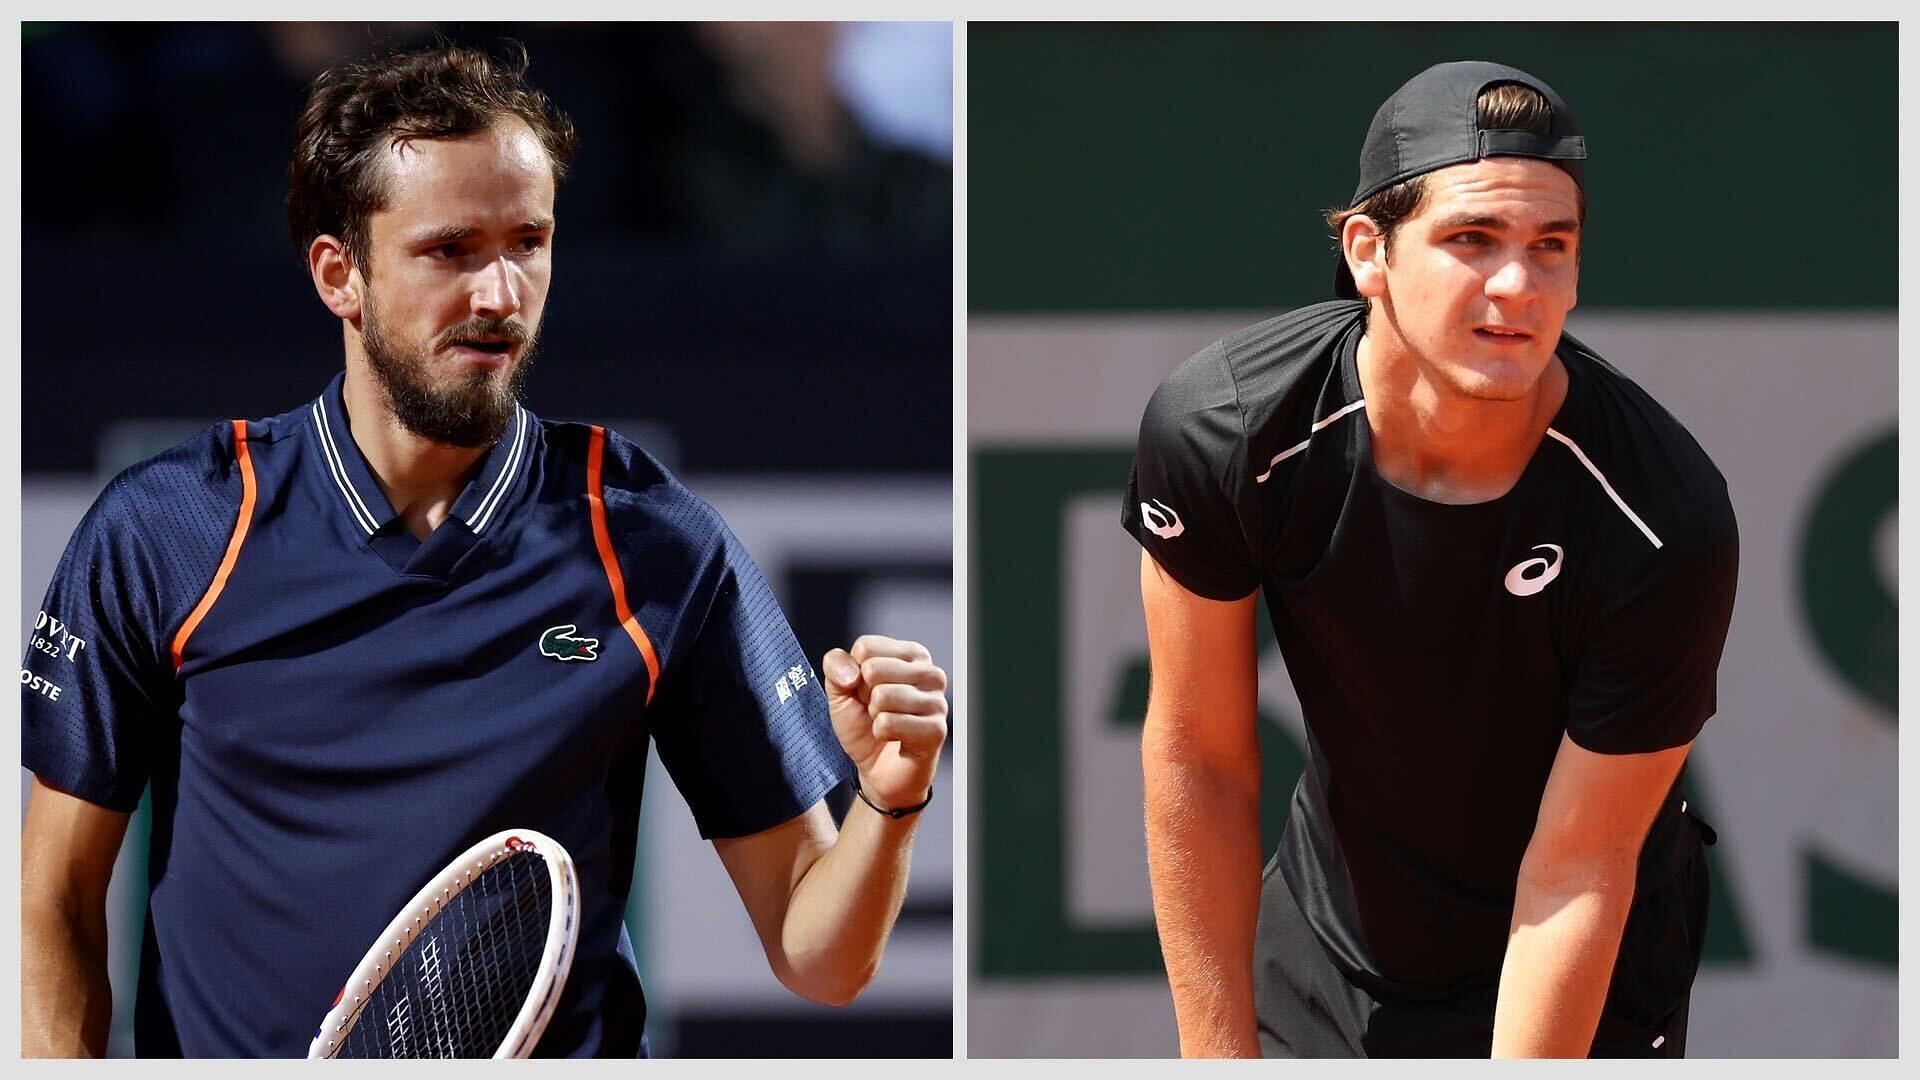 Daniil Medvedev vs Thiago Seyboth Wild is one of the first-round matches at the French Open